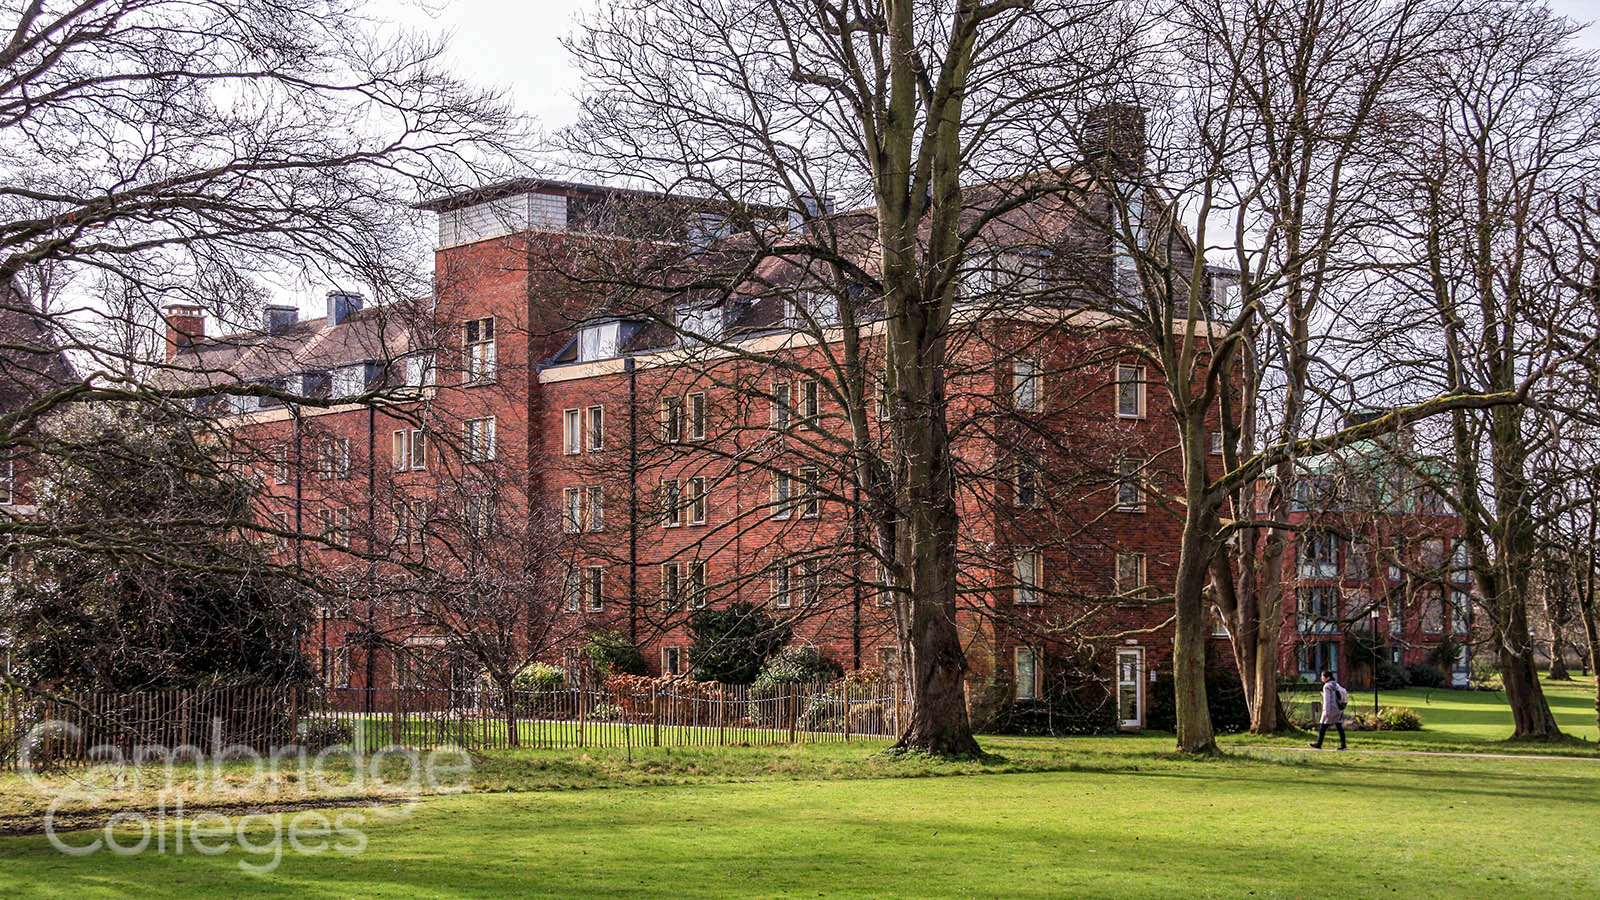 One of Homerton's buildings, partially obscured by trees